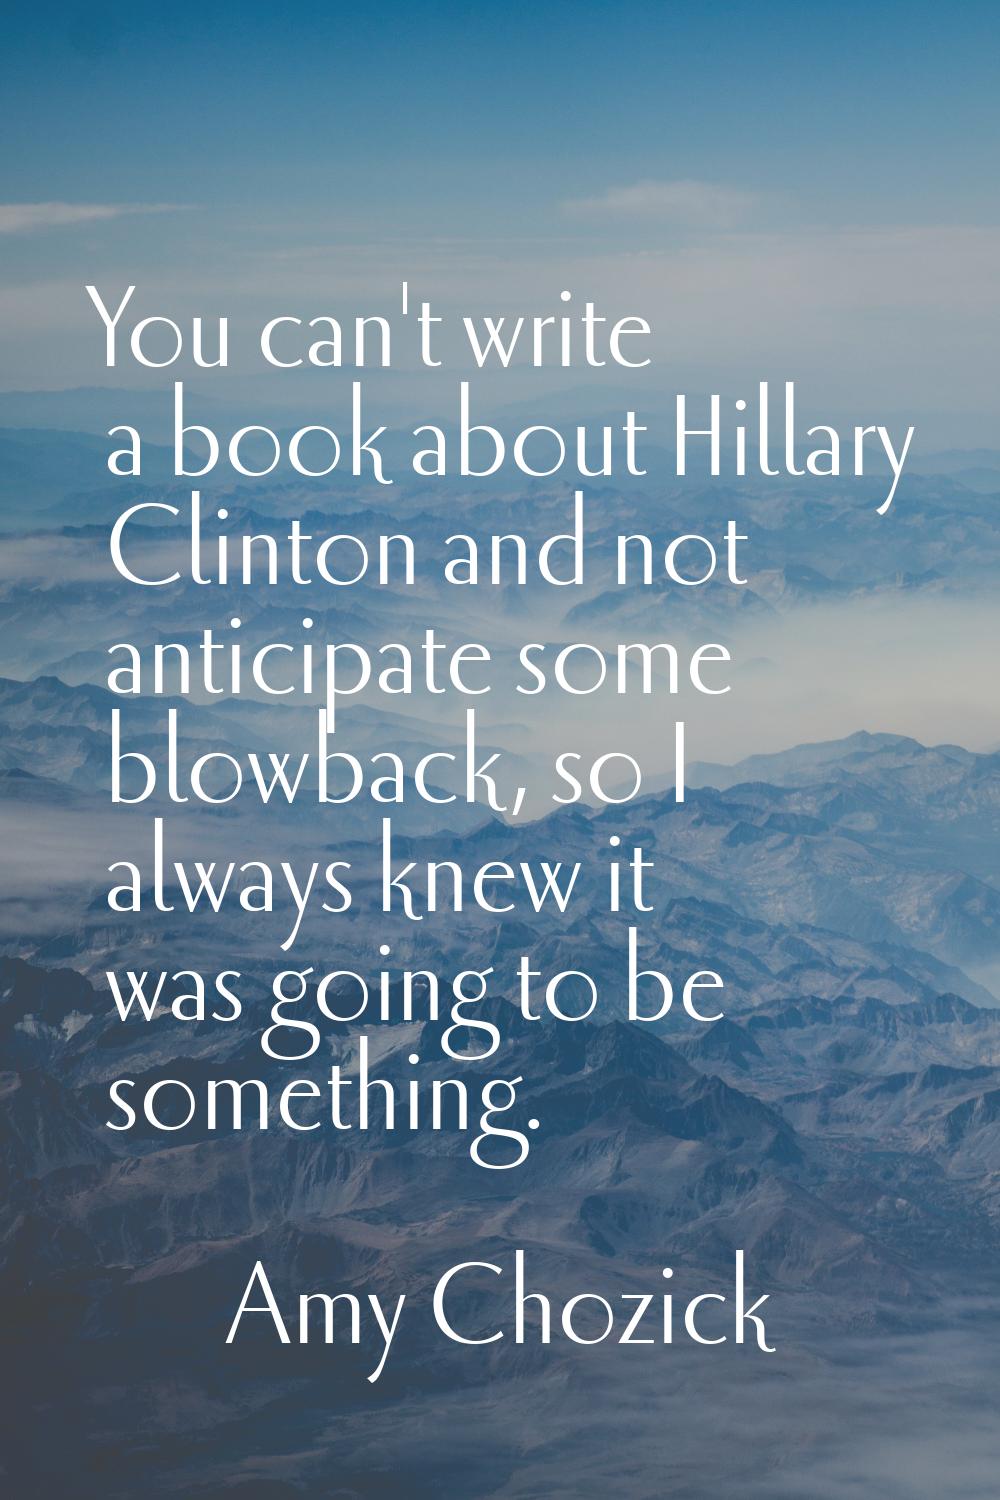 You can't write a book about Hillary Clinton and not anticipate some blowback, so I always knew it 